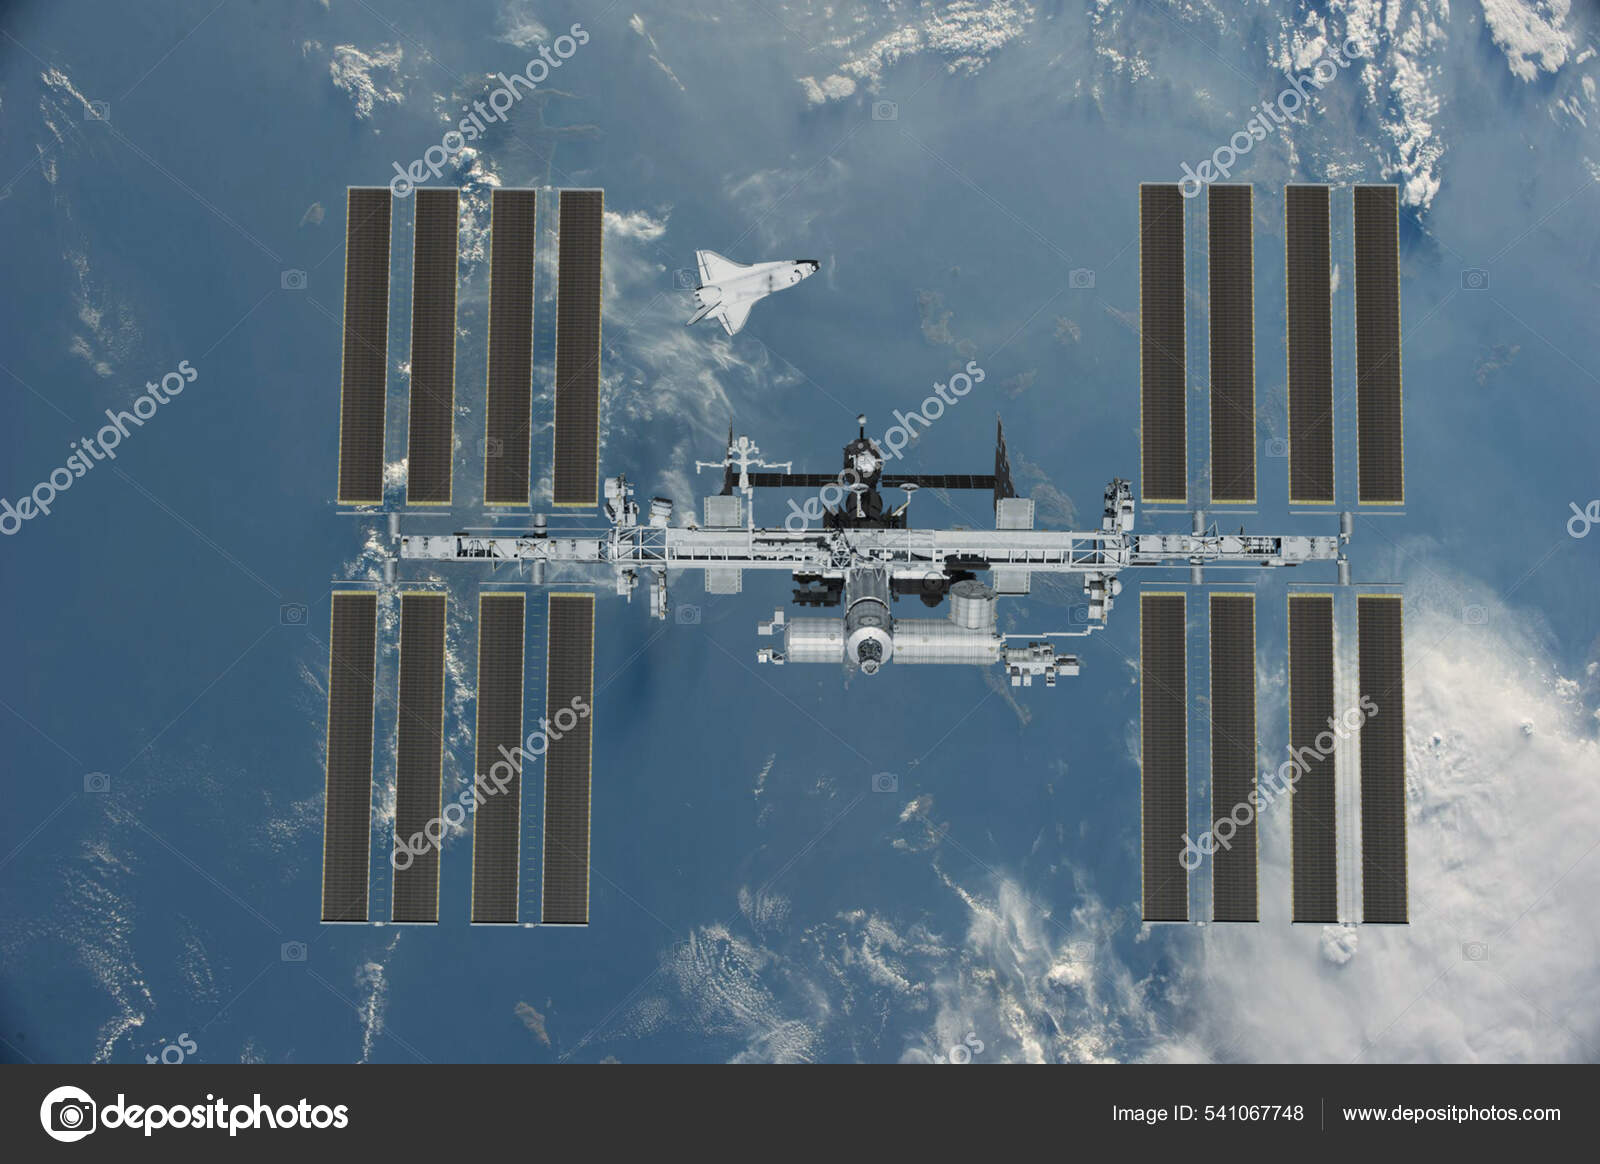 space station orbit view